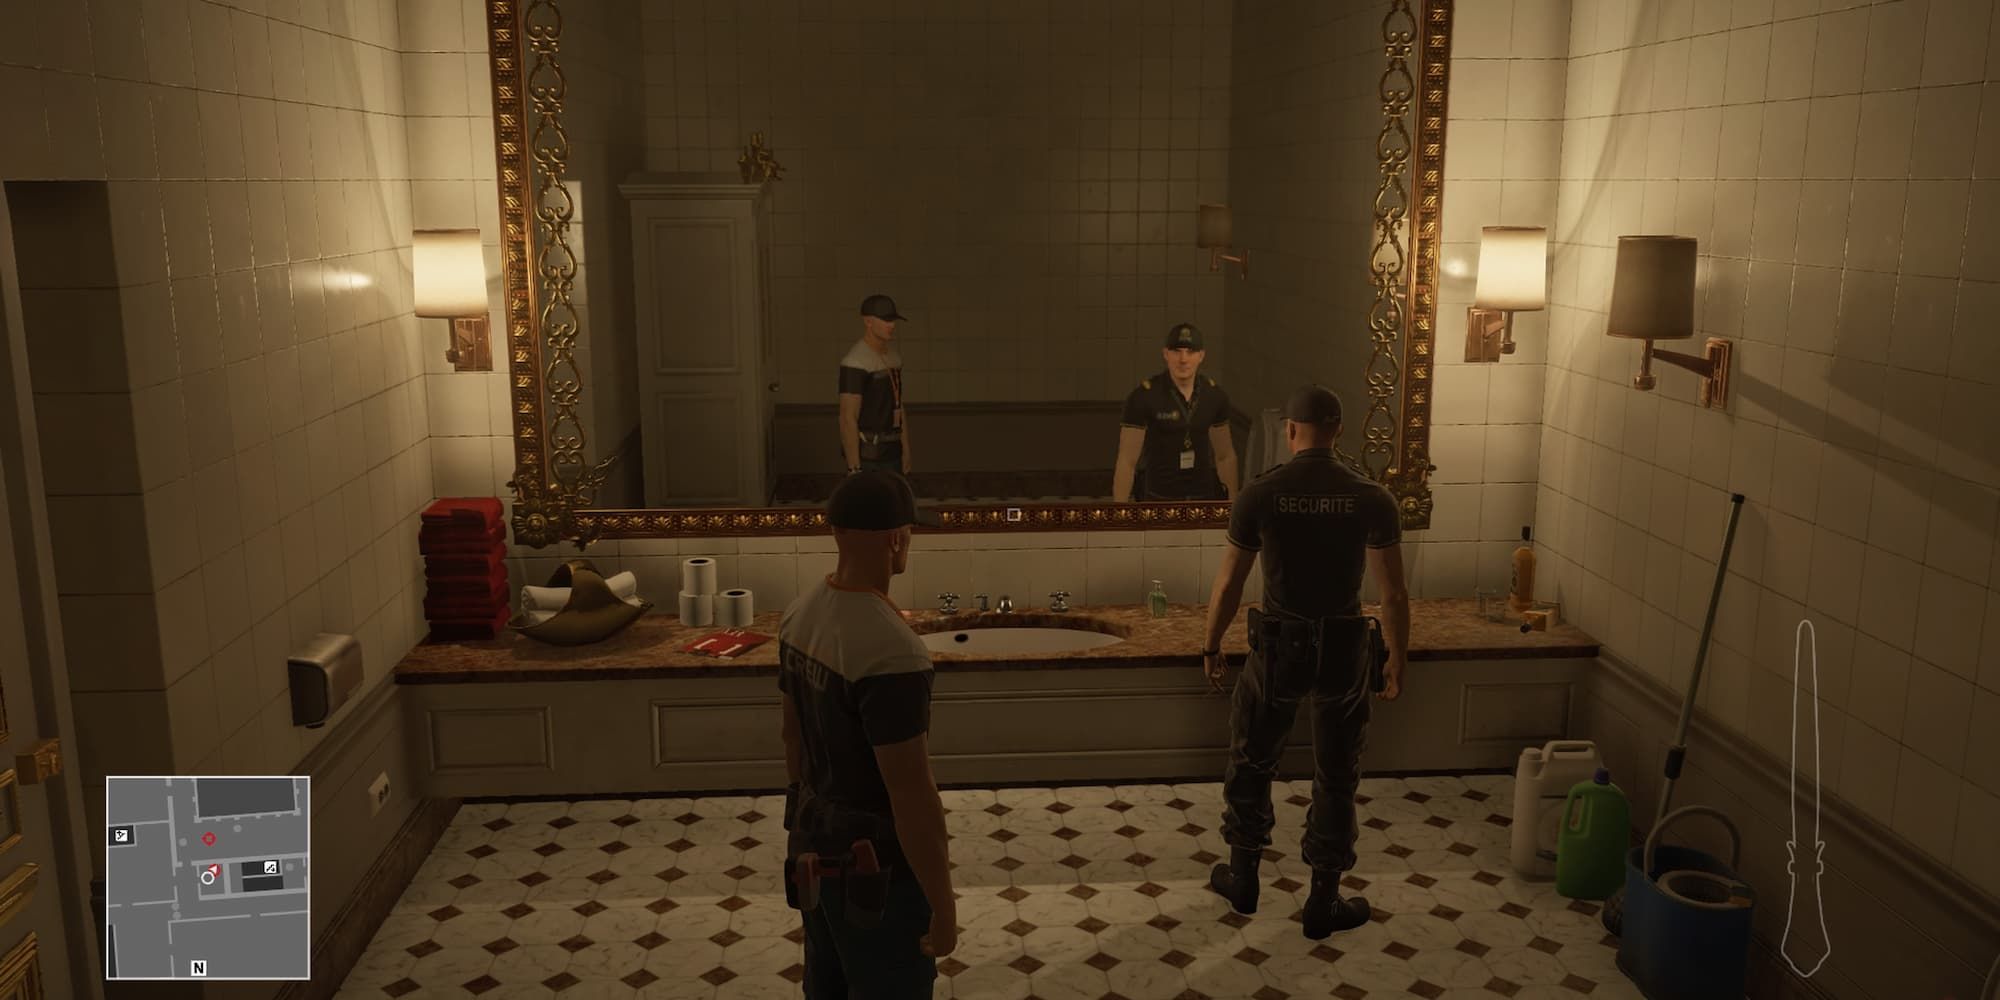 47 standing behind his target in a Paris bathroom, with a mirror reflecting the room